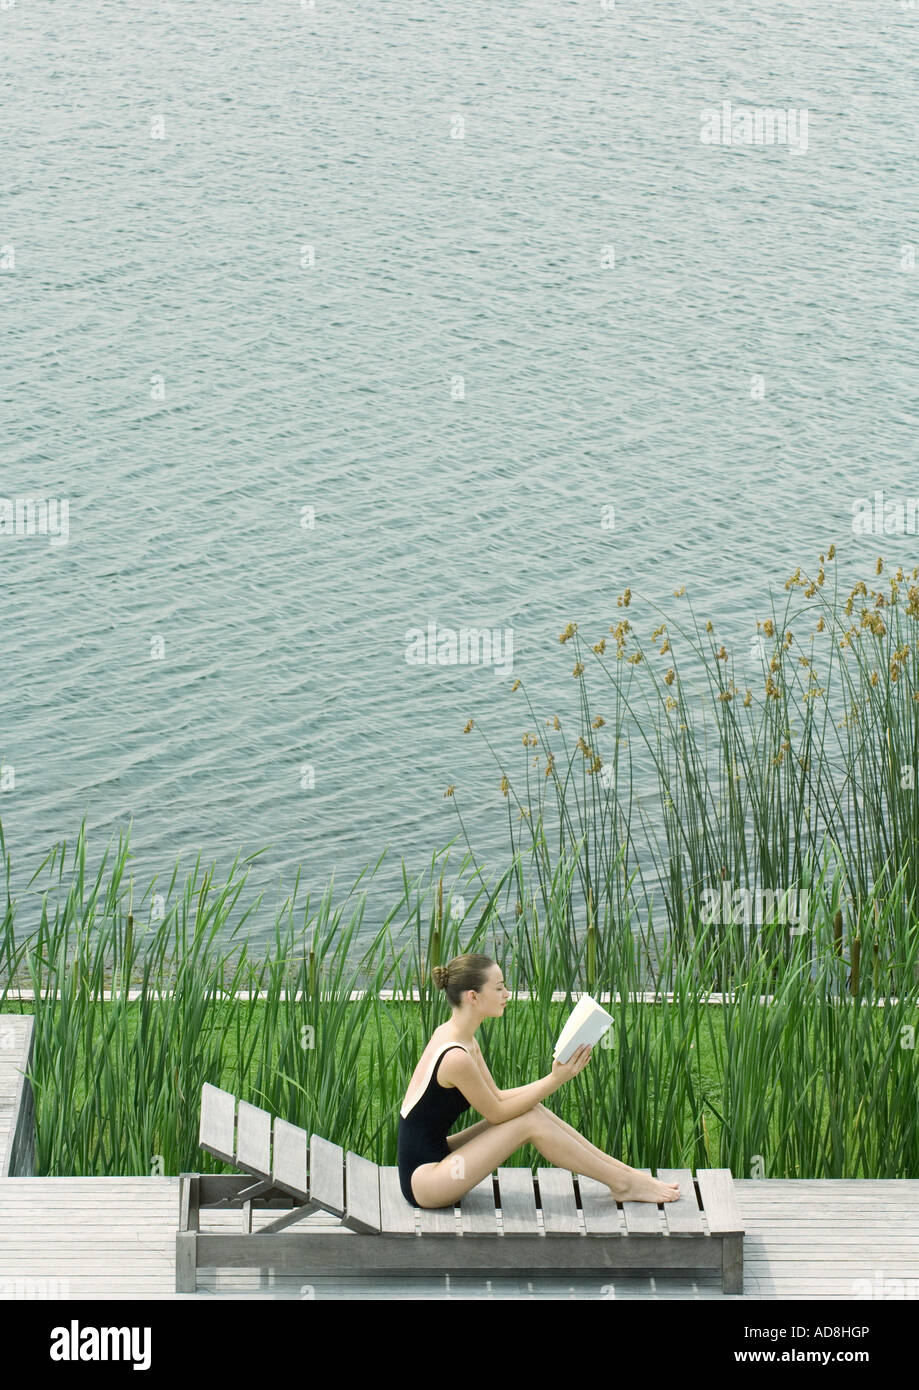 Woman sitting up on lounge chair, reading, next to lake Stock Photo